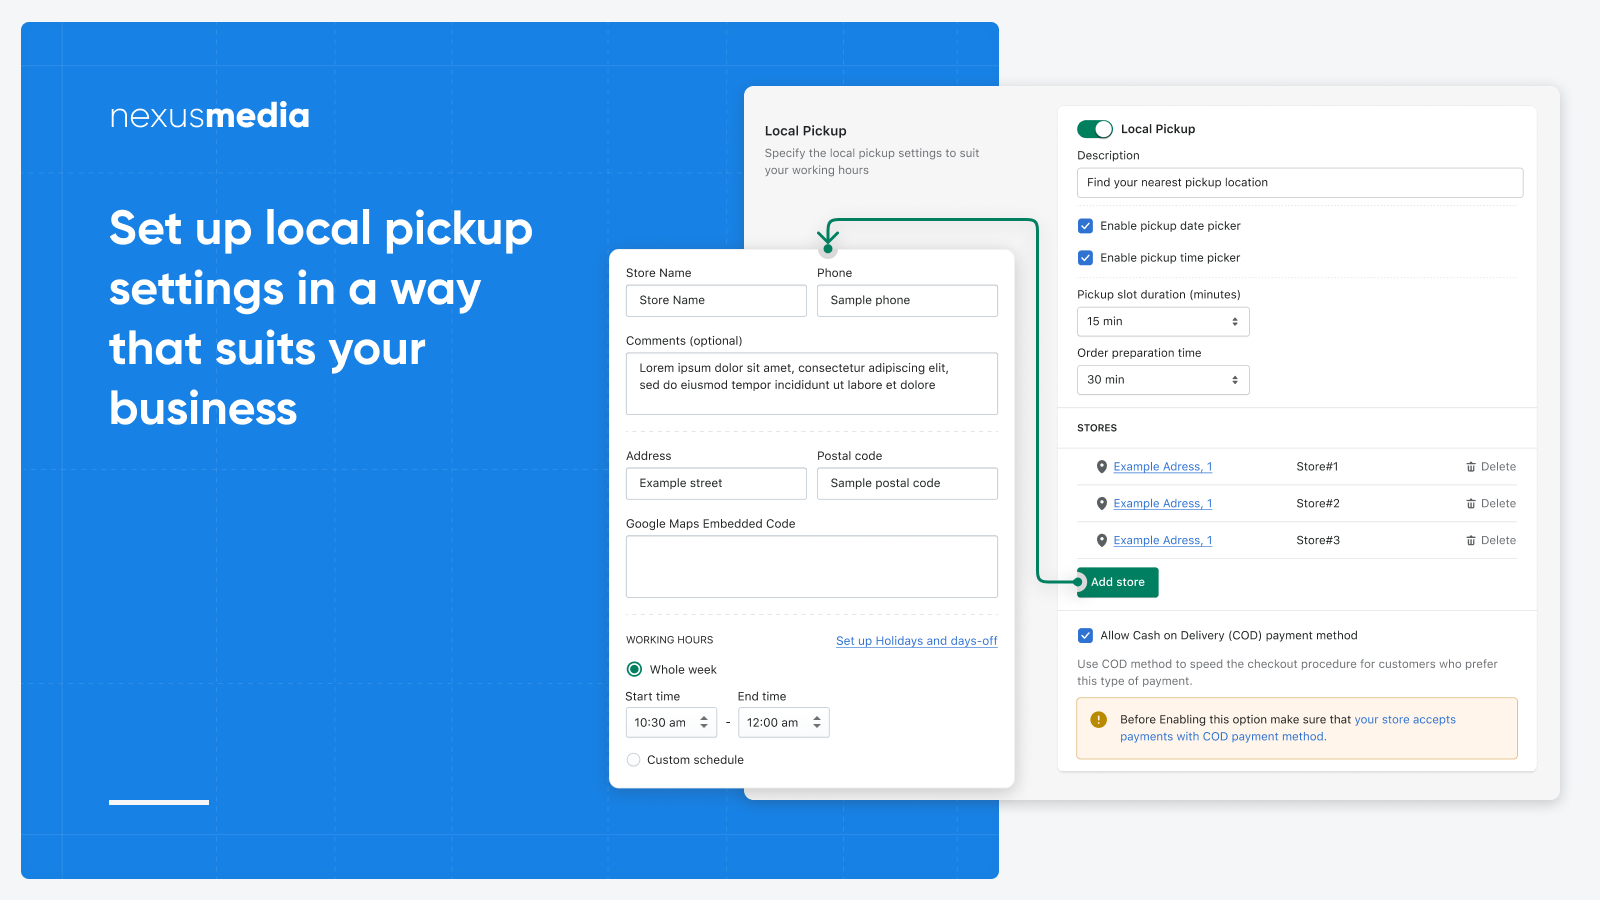 Smart tools for scheduling local pickups (takeout)